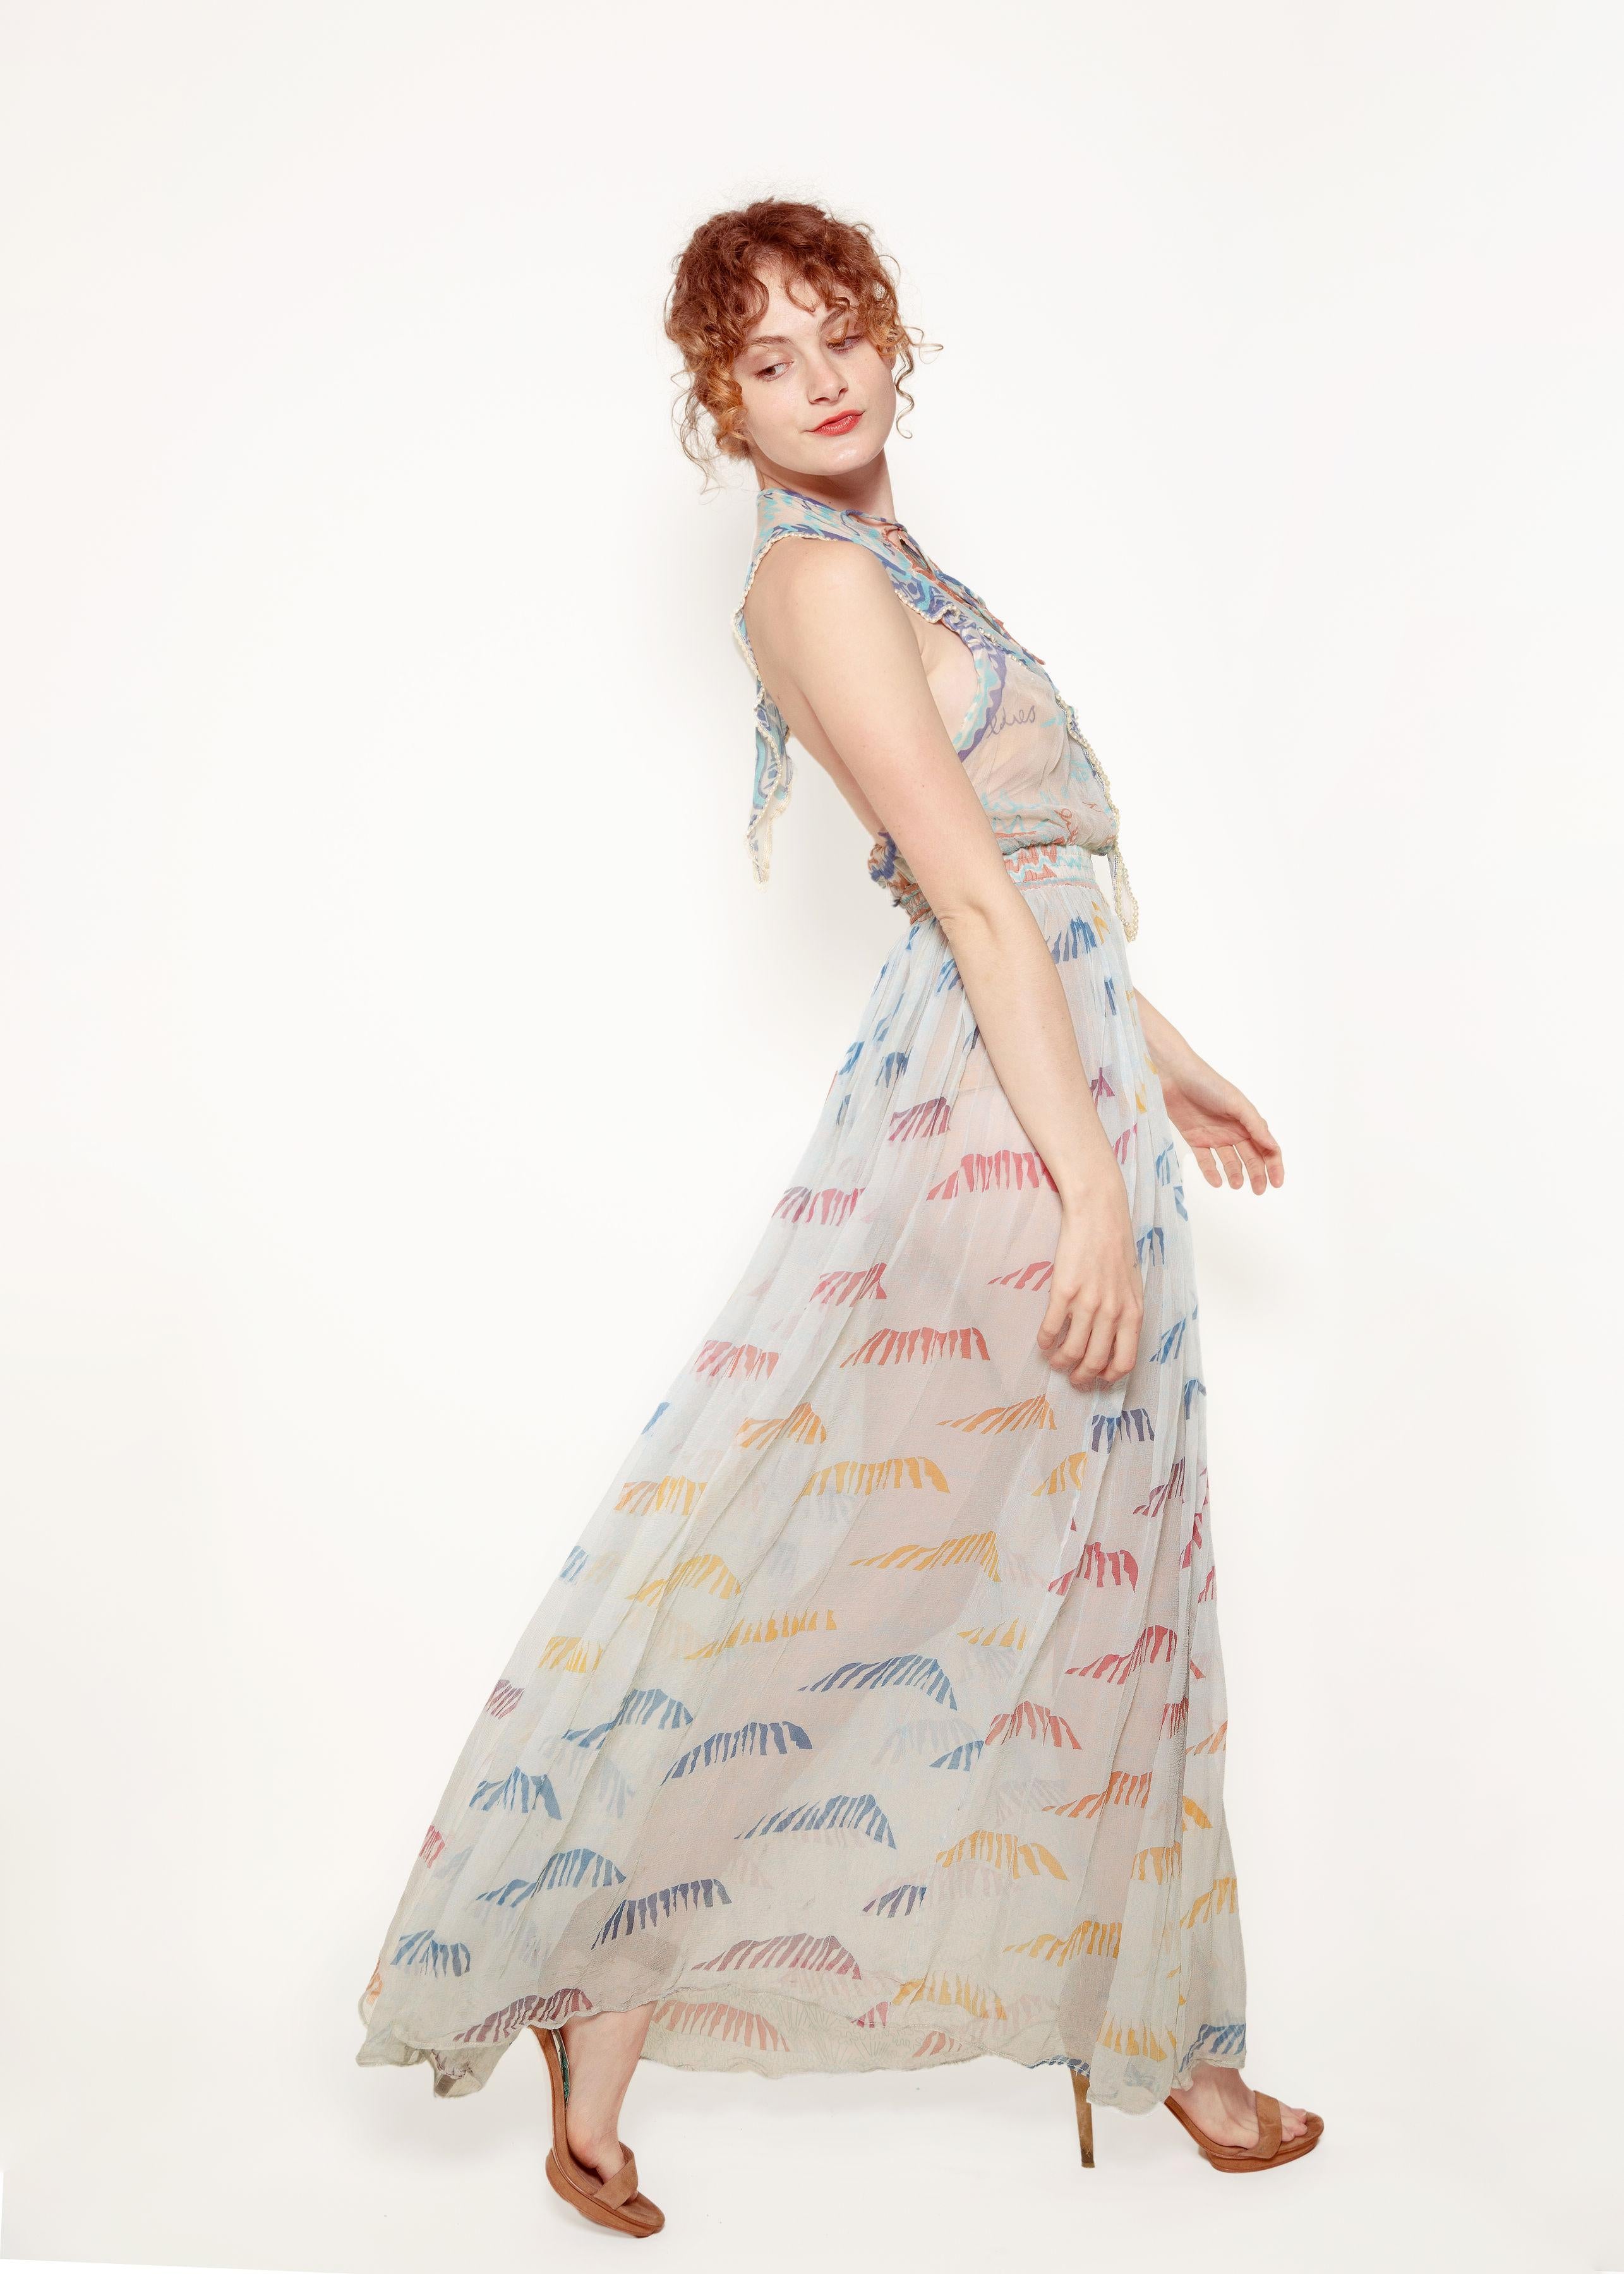 Our Zandra Rhodes 1974 dress is out of this world.  Printed With 